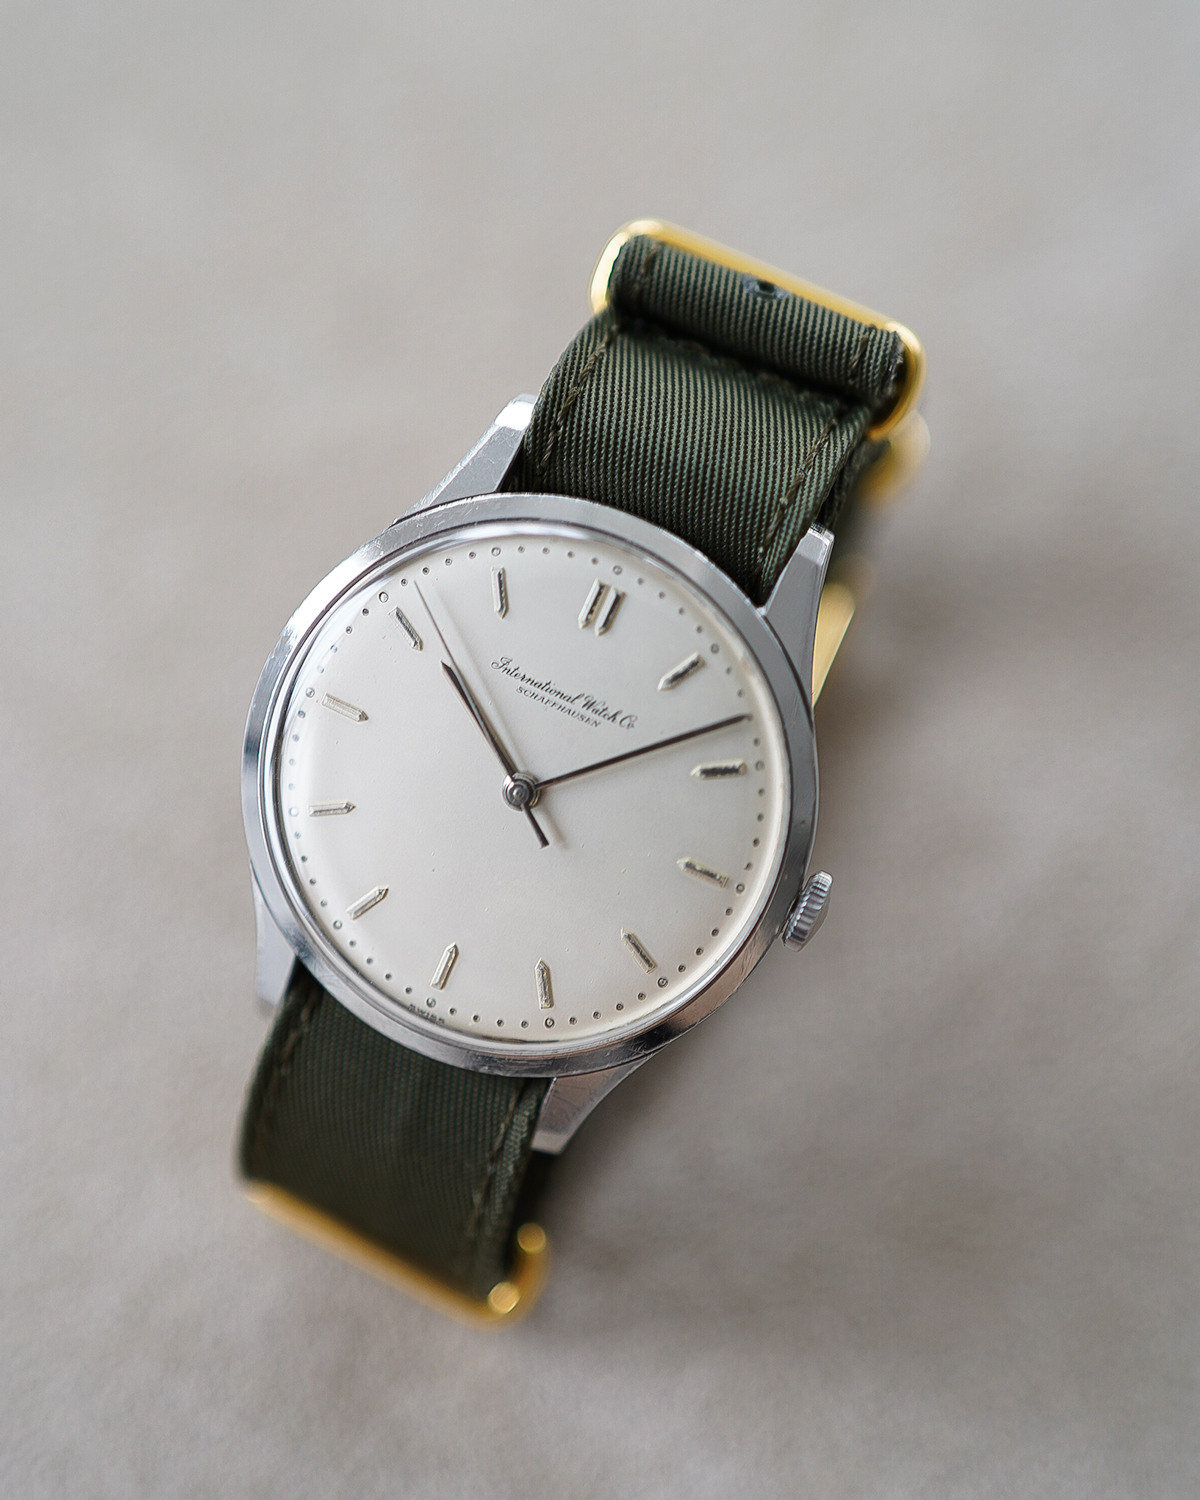 IWC｜BAR INDEX - 60's + CES NATO LIMONTA BAND 18mm GRN/GD｜IWC (Vintage Watch)